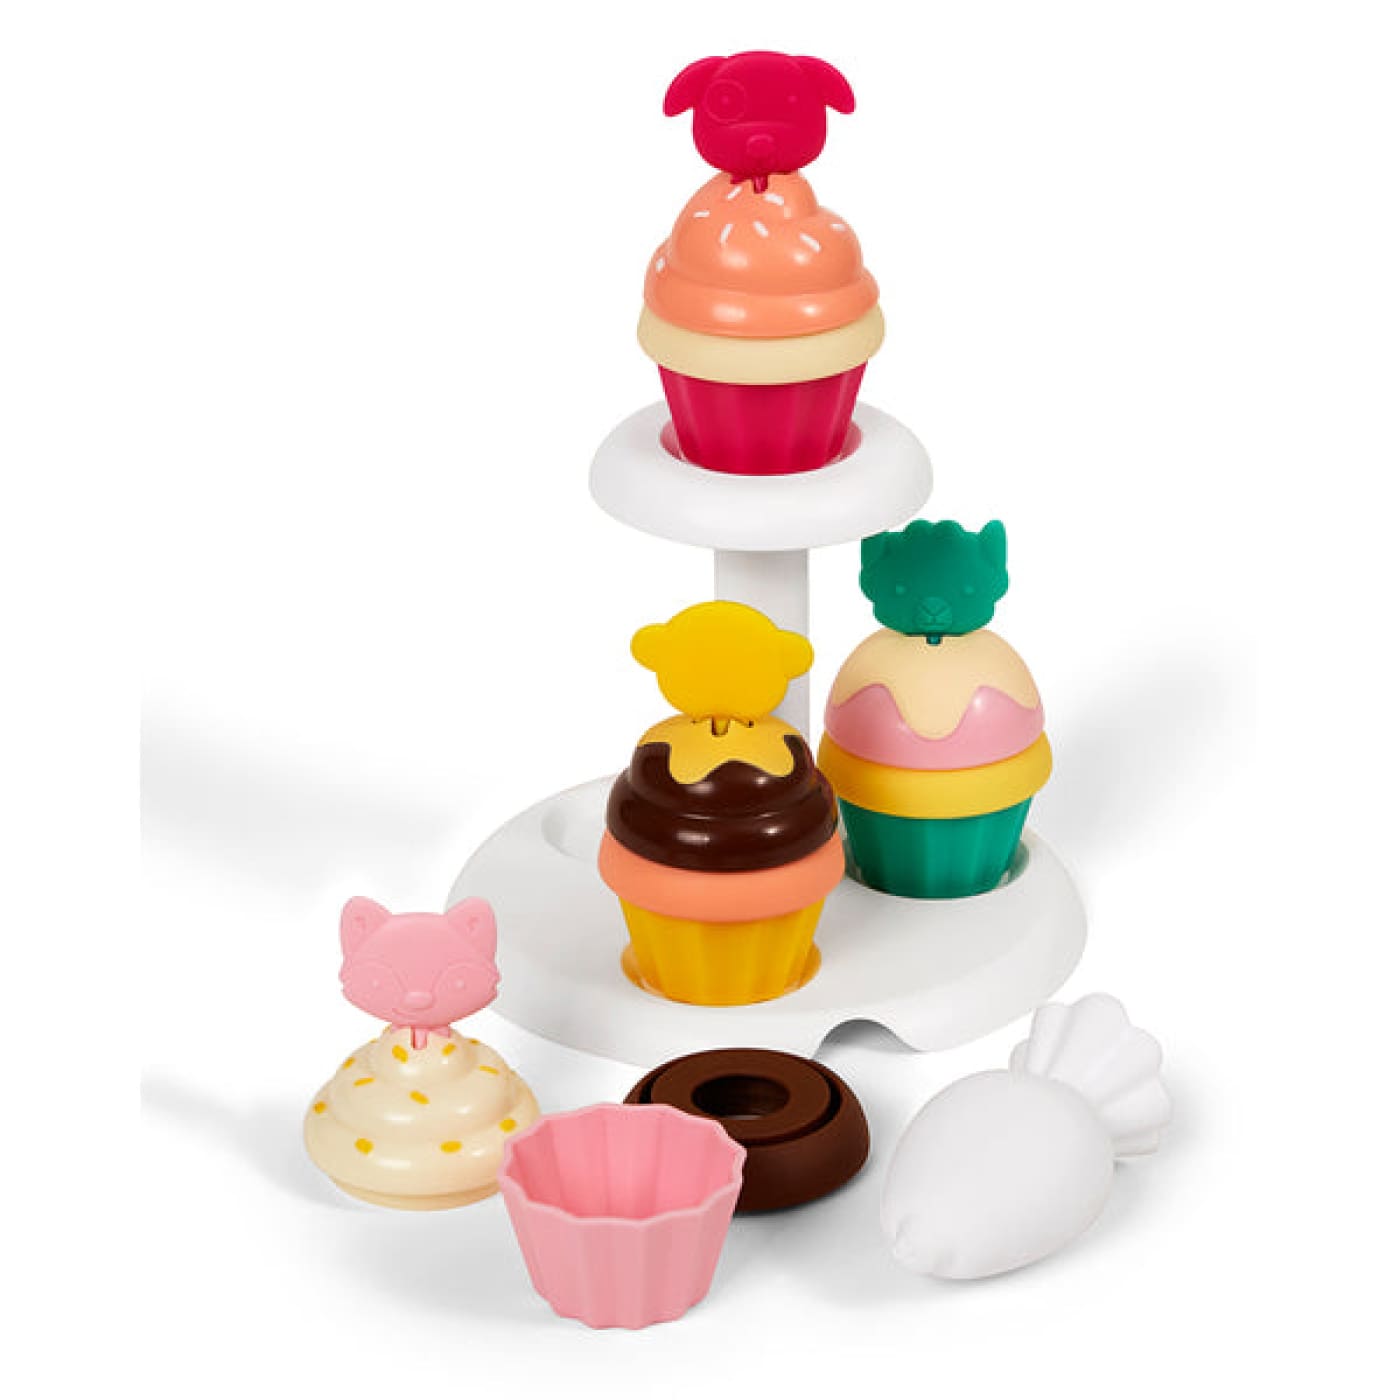 Skip Hop Zoo Sort and Stack Cupcakes - Cupcakes - TOYS & PLAY - HAND HELD/EDUCATIONAL